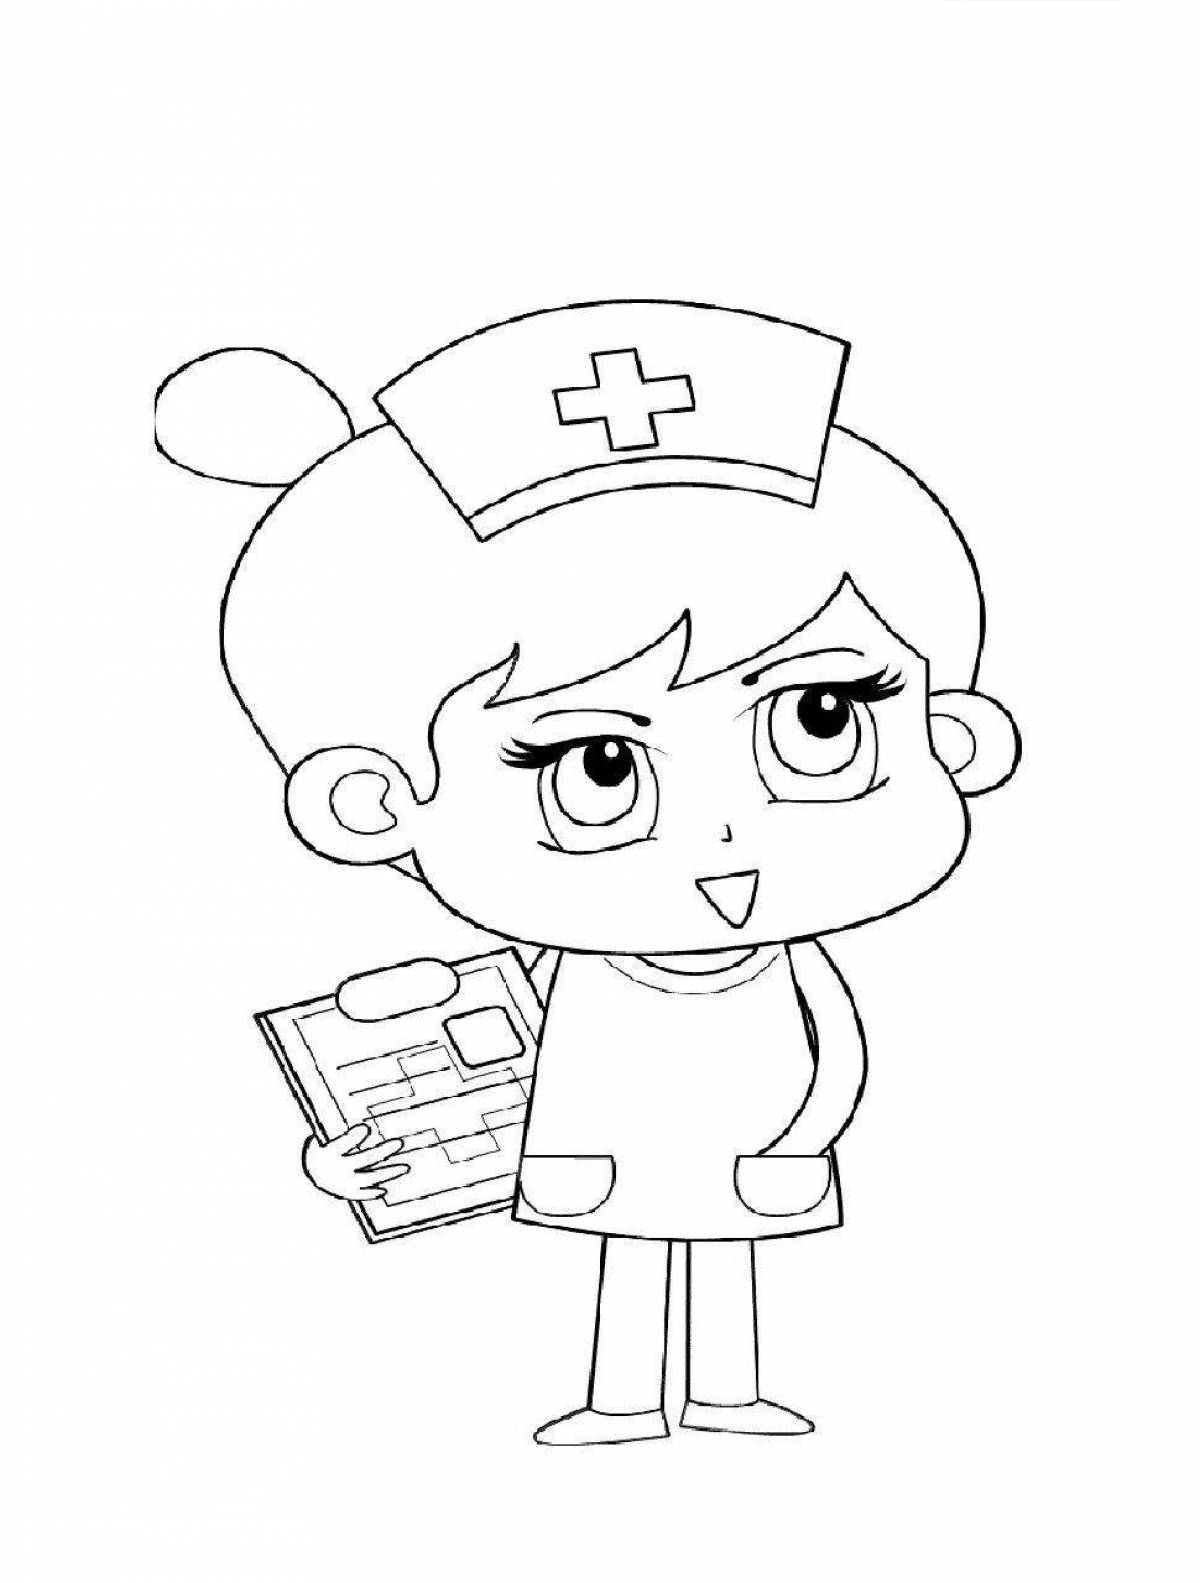 Military nurse coloring book for kids